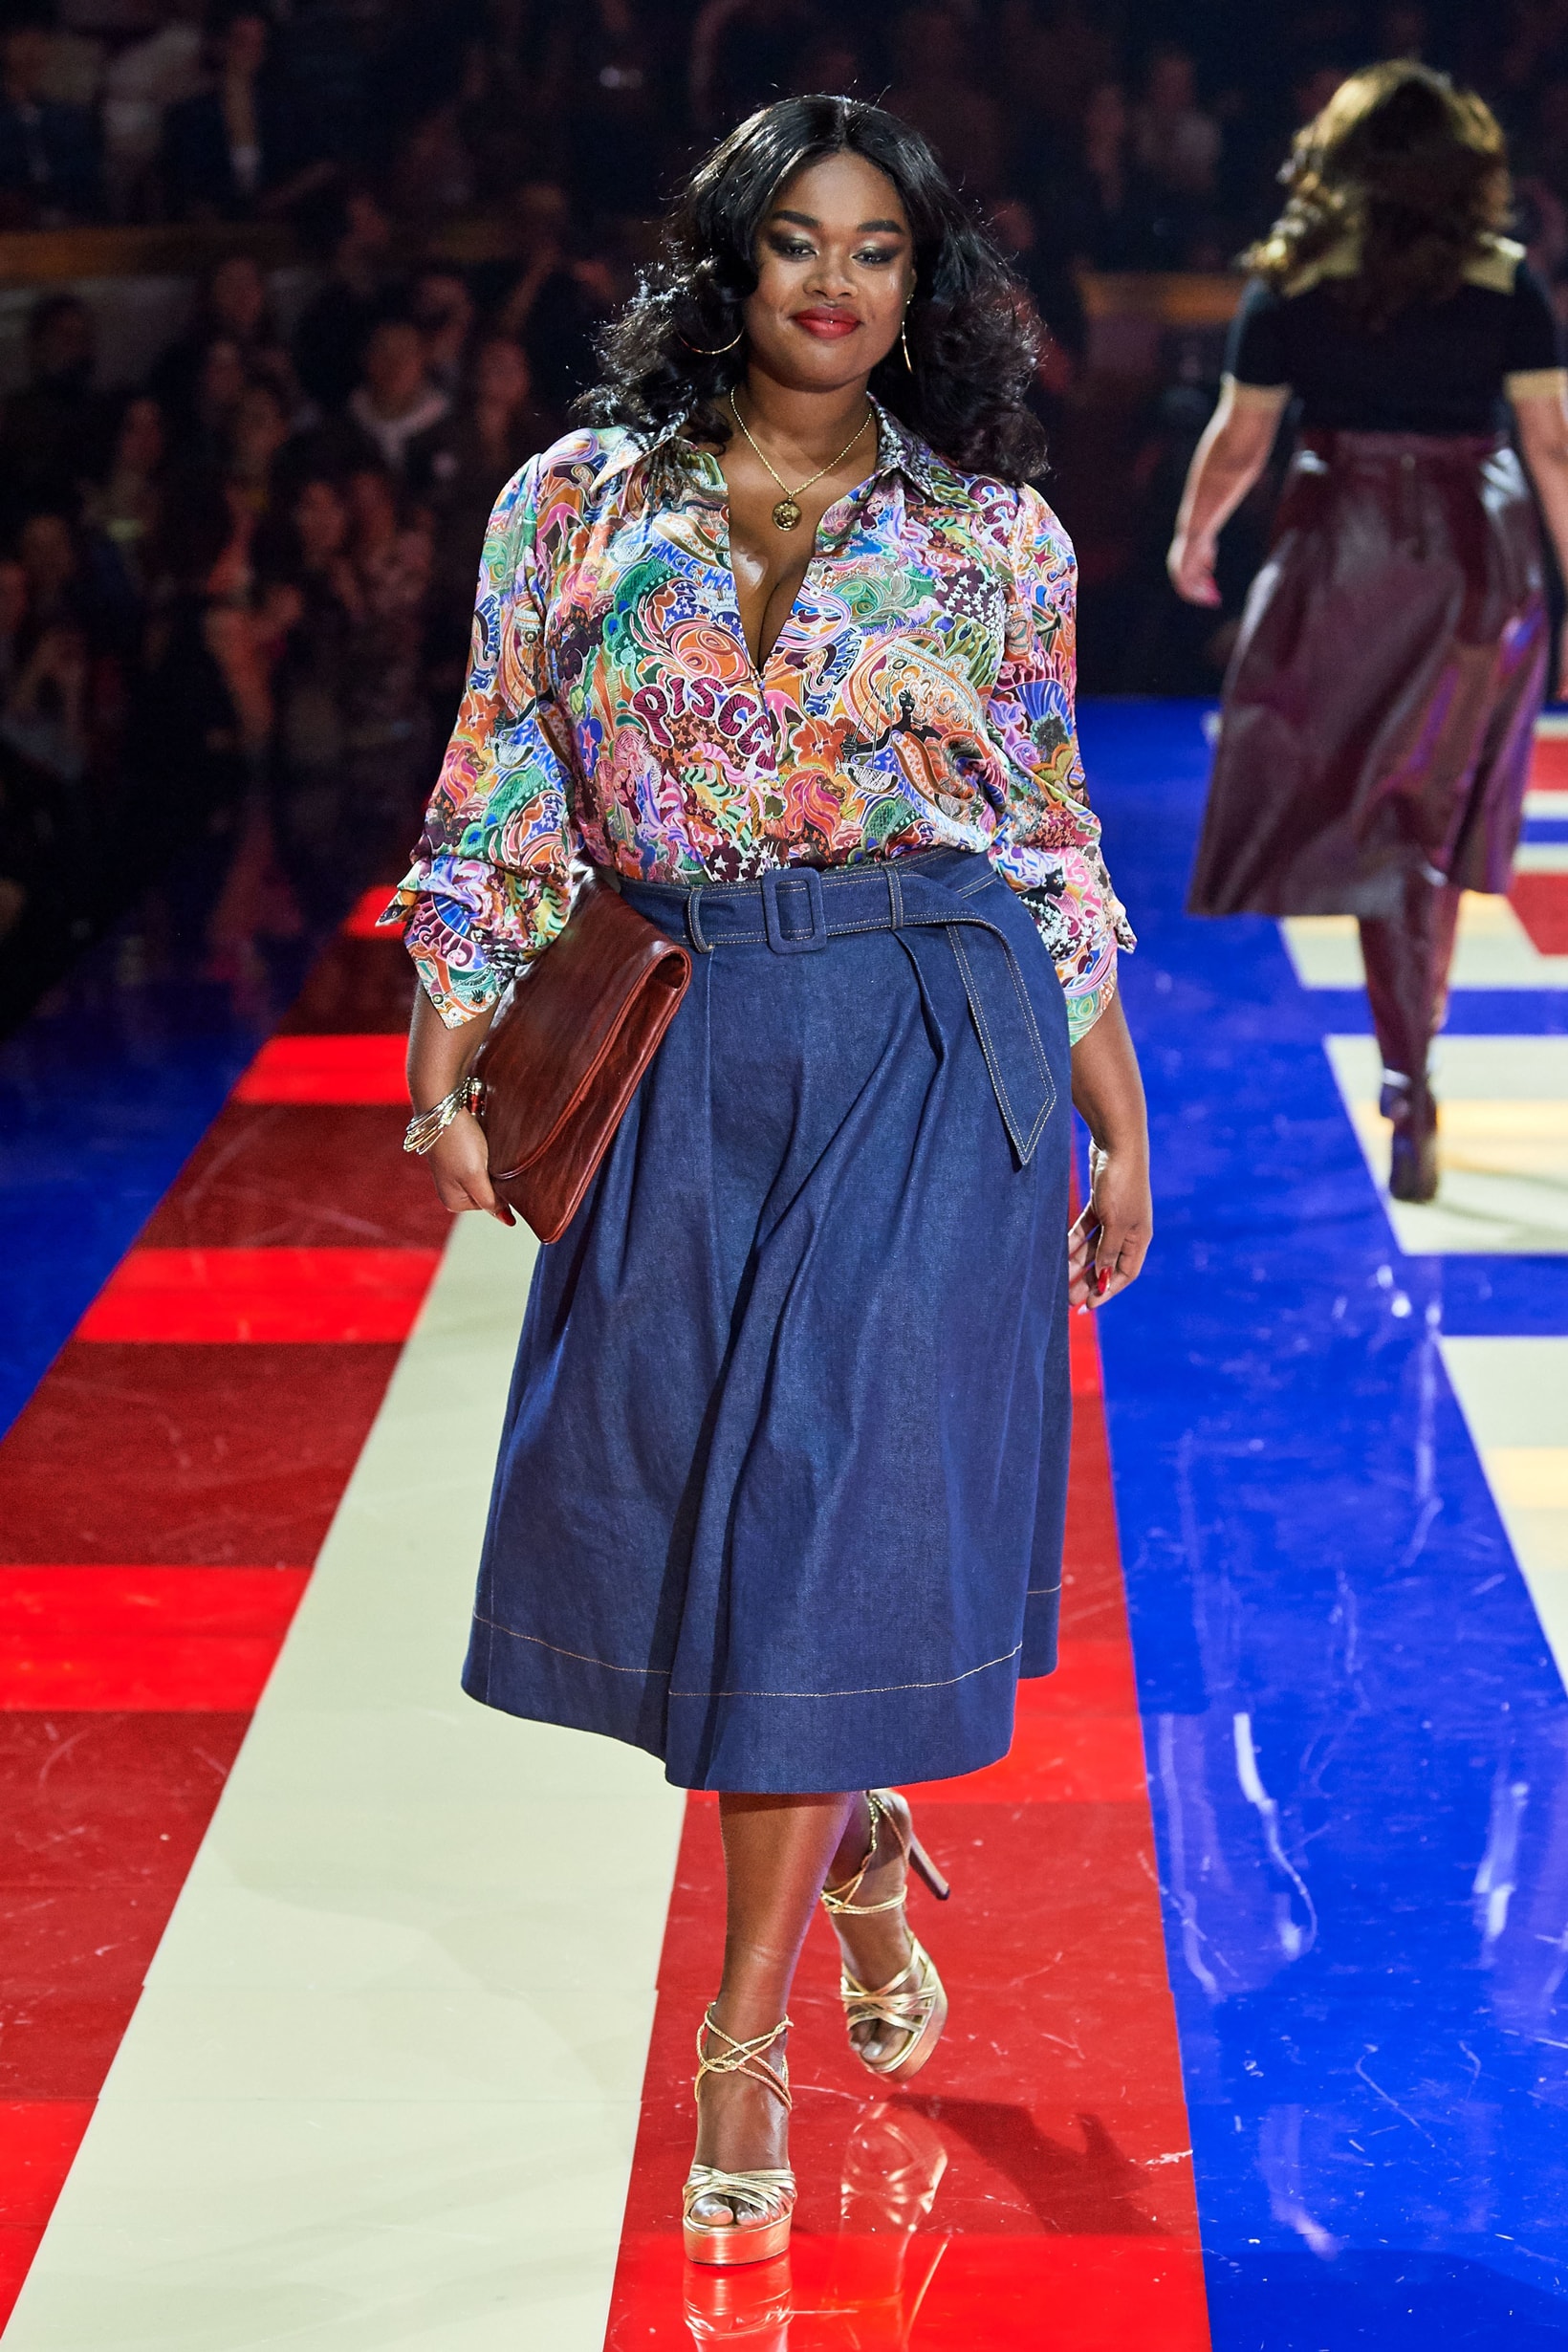 Tommy Hilfiger TommyNow Zendaya Spring 2019 Paris Fashion Week Show Collection Precious Lee Skirt Blue Top White Pink Blue